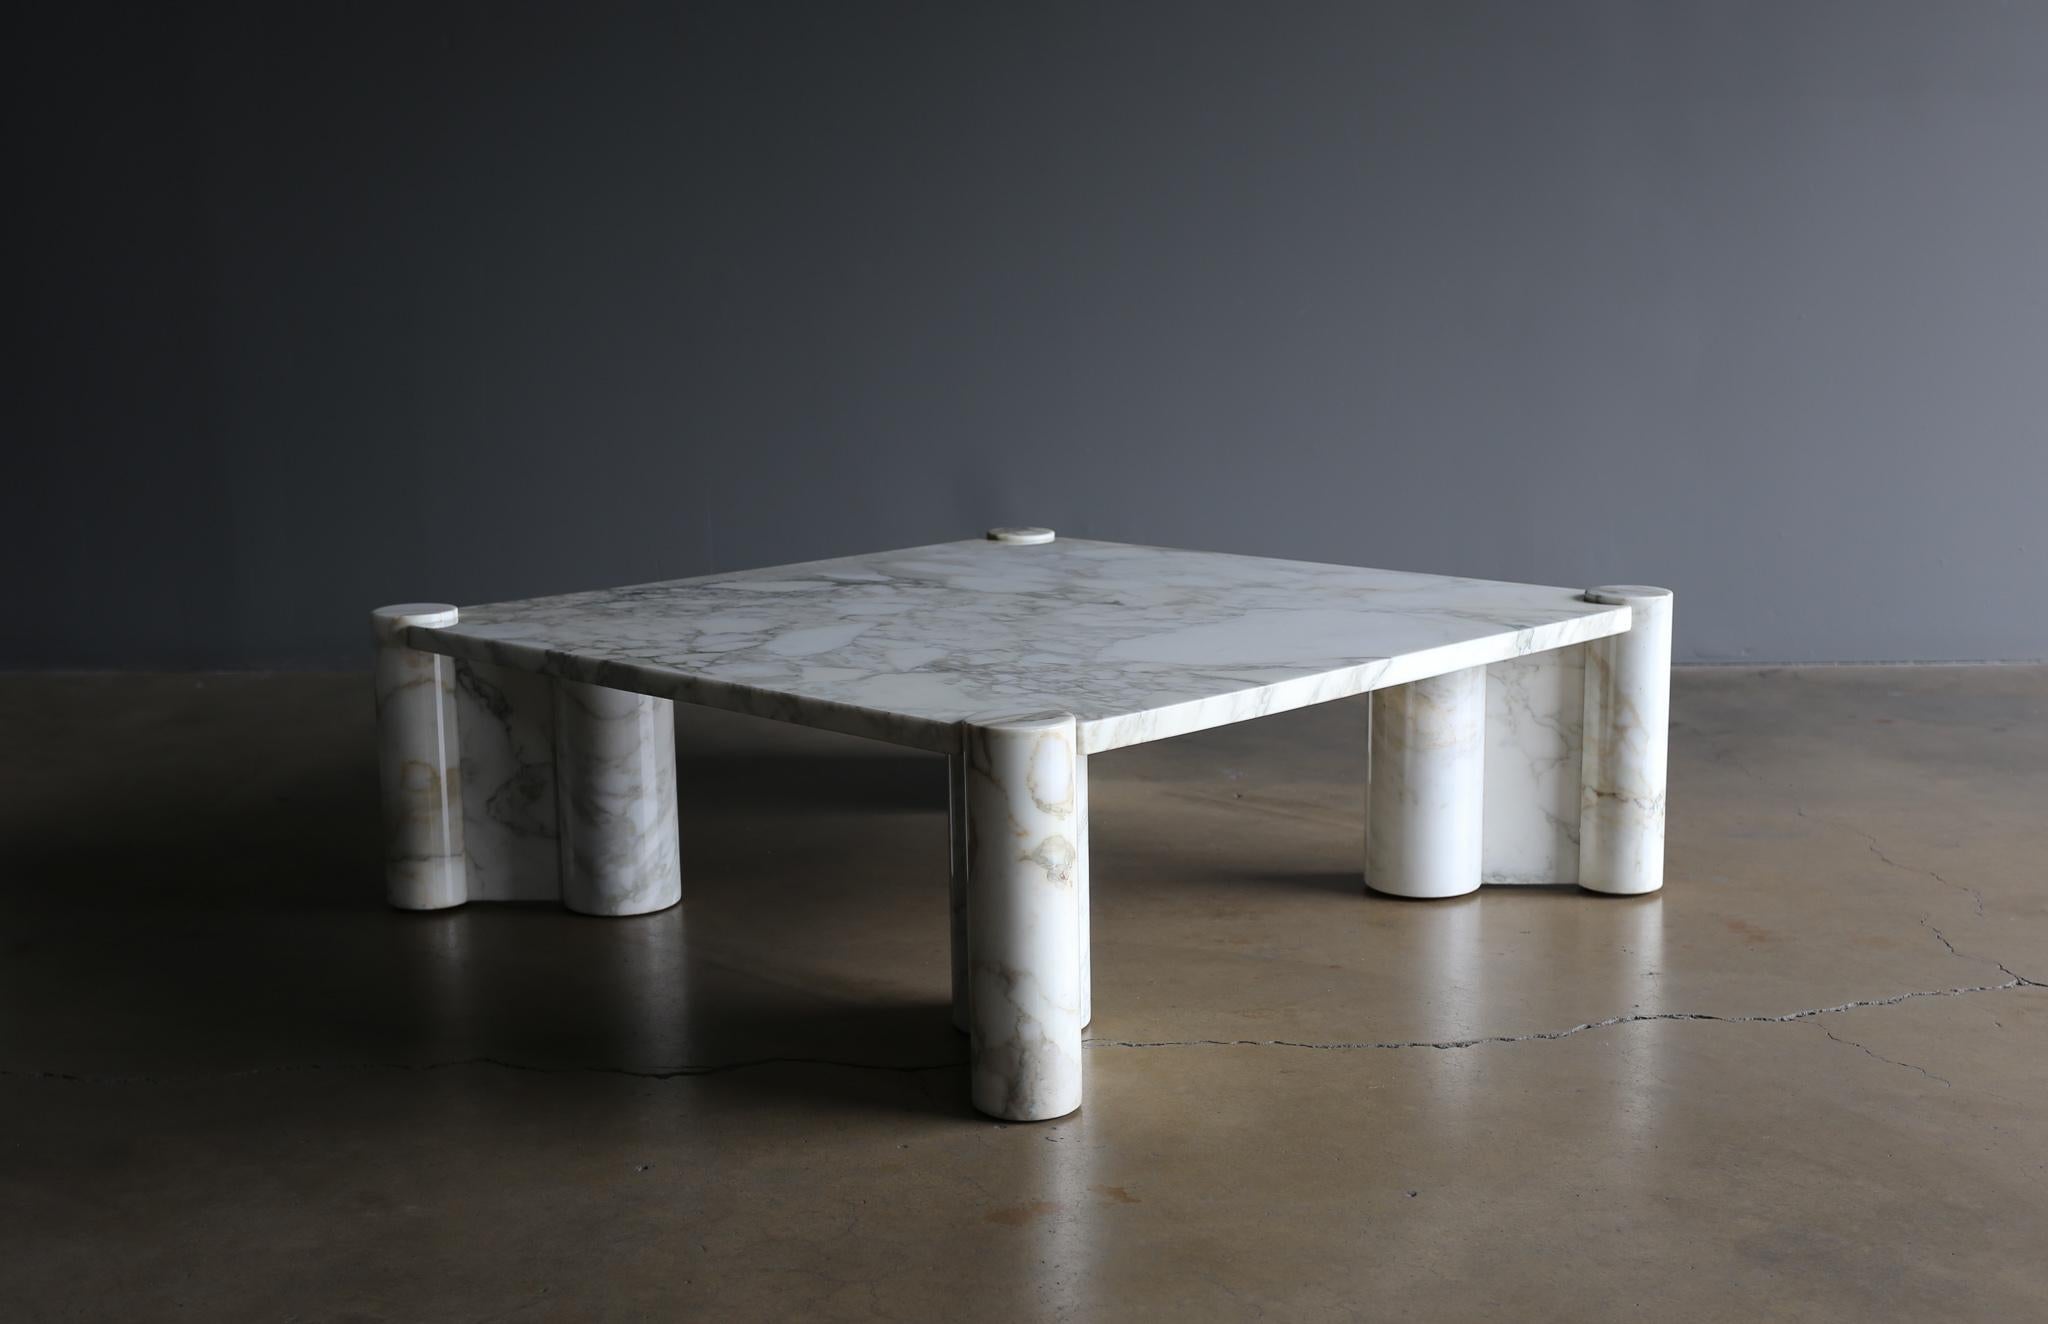 Gae Aulenti Calacatta marble jumbo table. Cylindrical marble legs with dynamic veining. Manufactured by Knoll International, circa 1970.